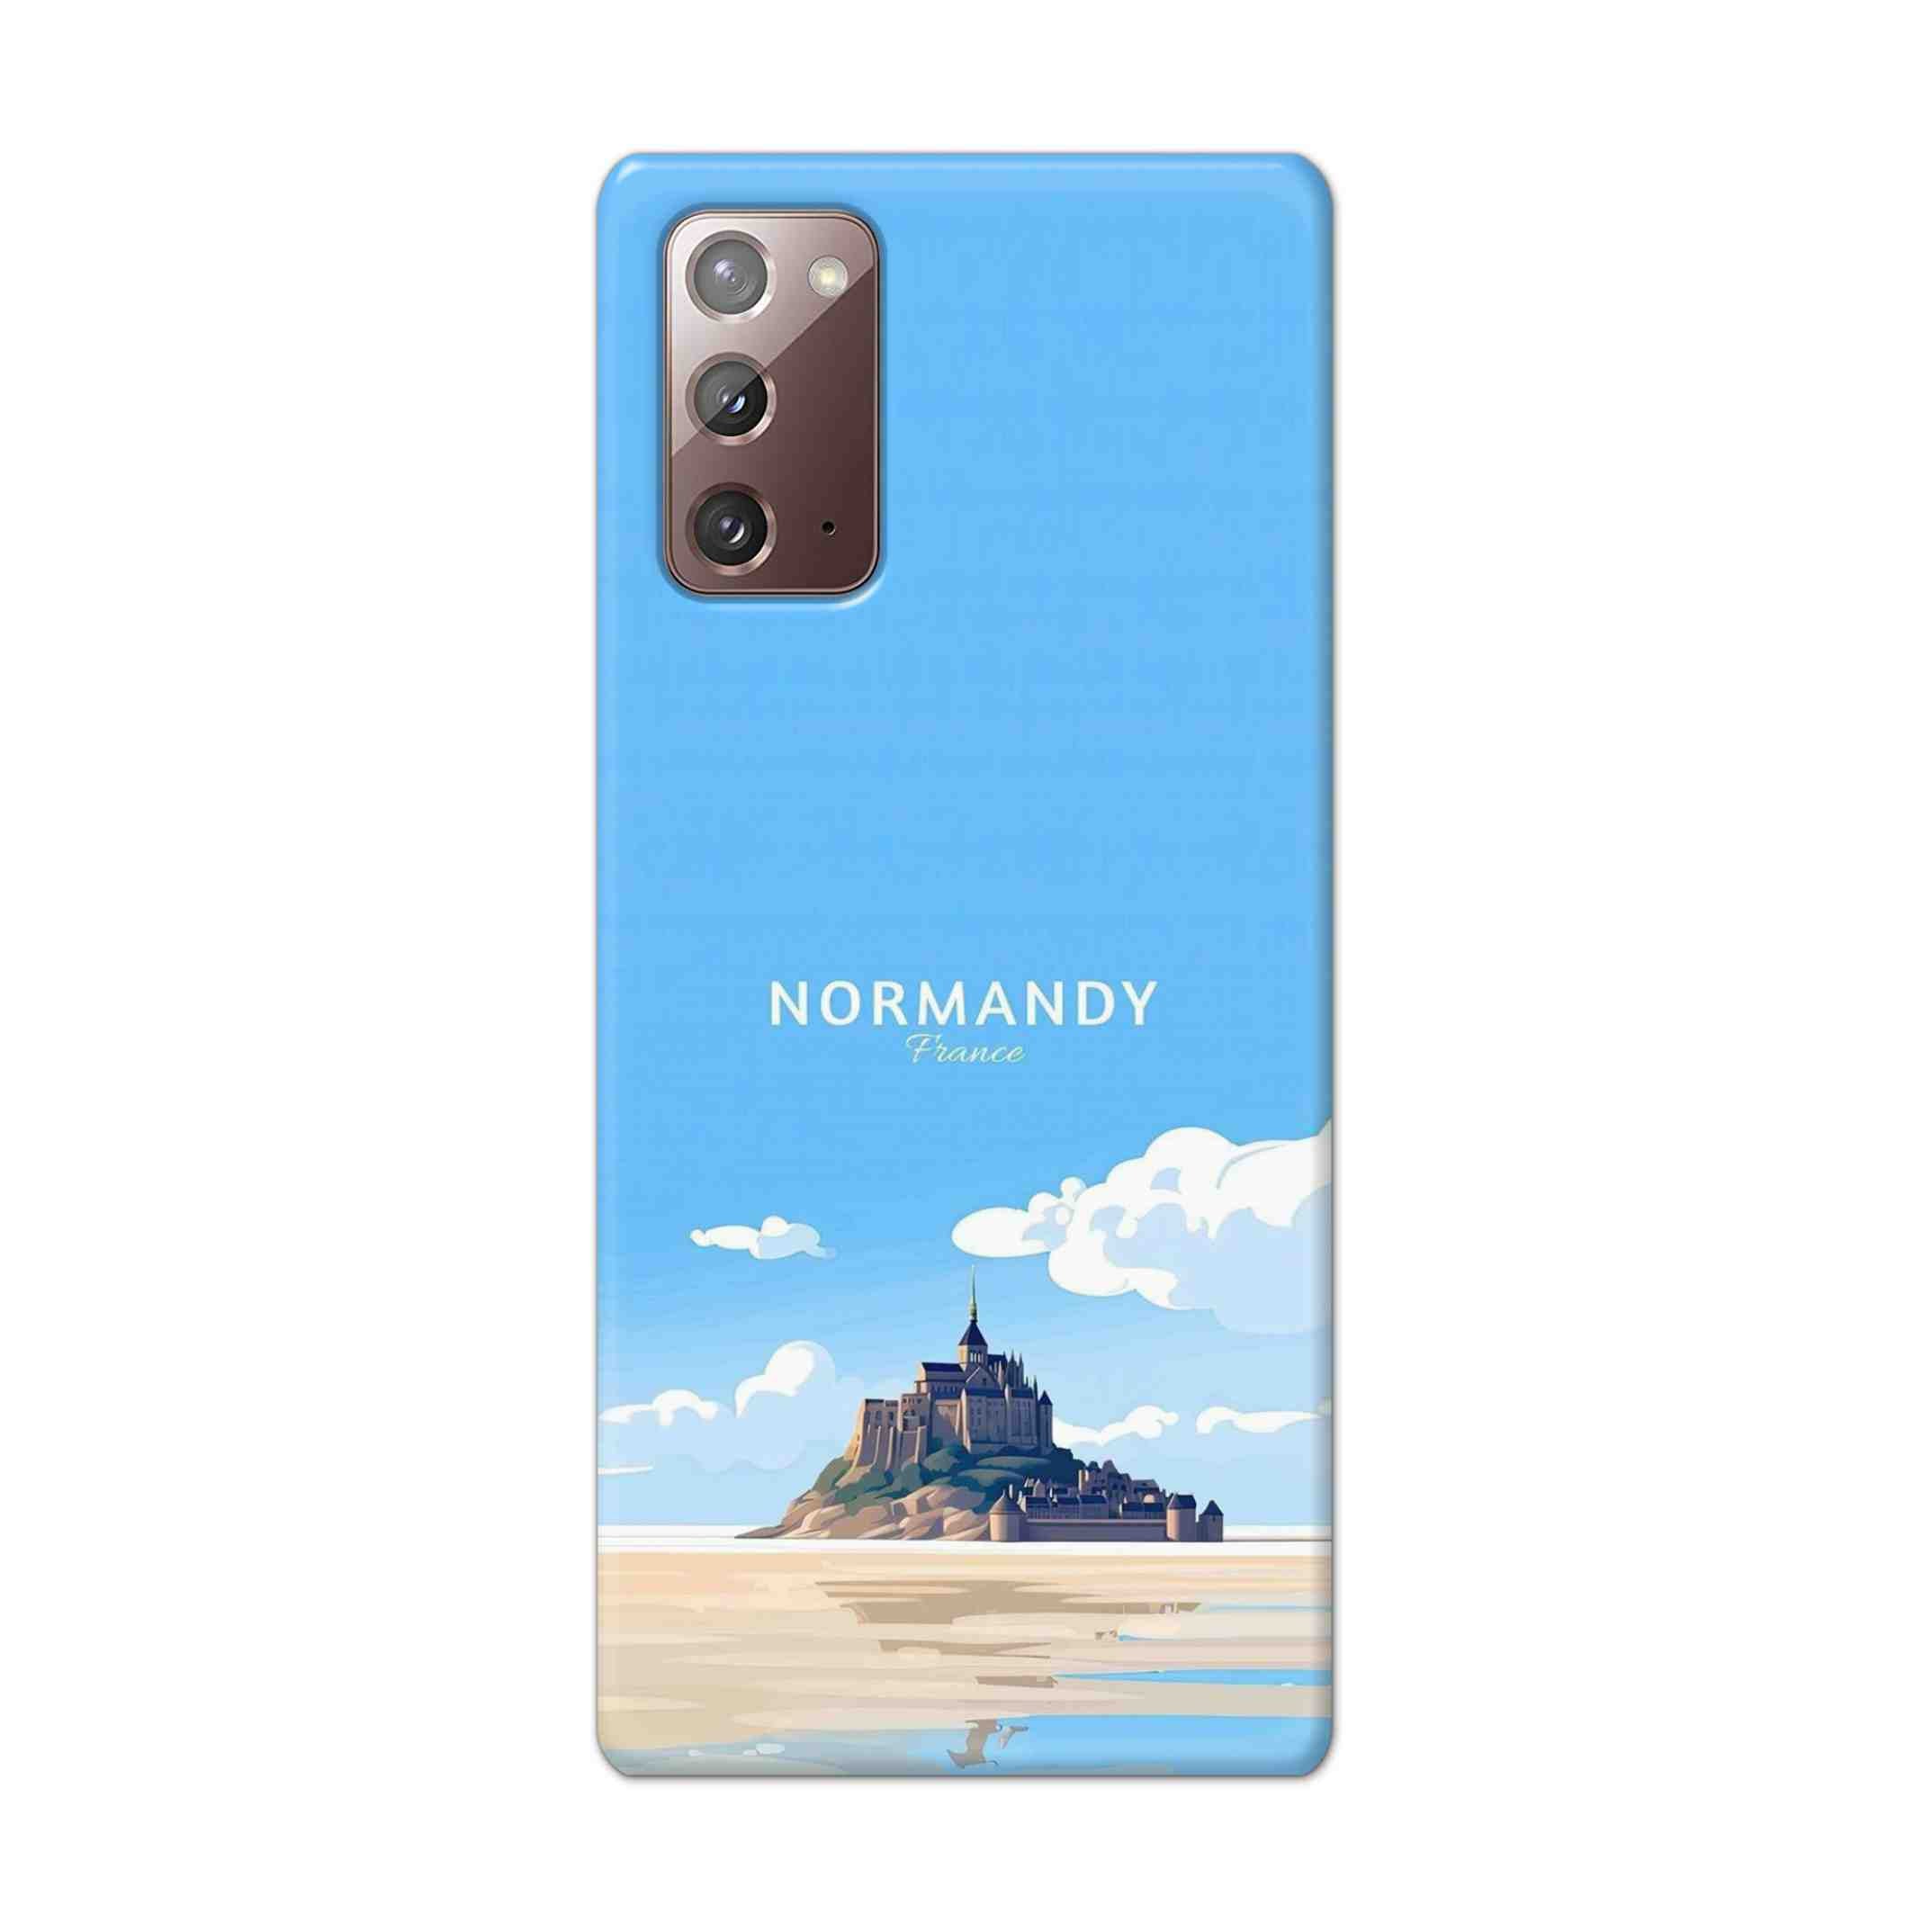 Buy Normandy Hard Back Mobile Phone Case Cover For Samsung Galaxy Note 20 Online